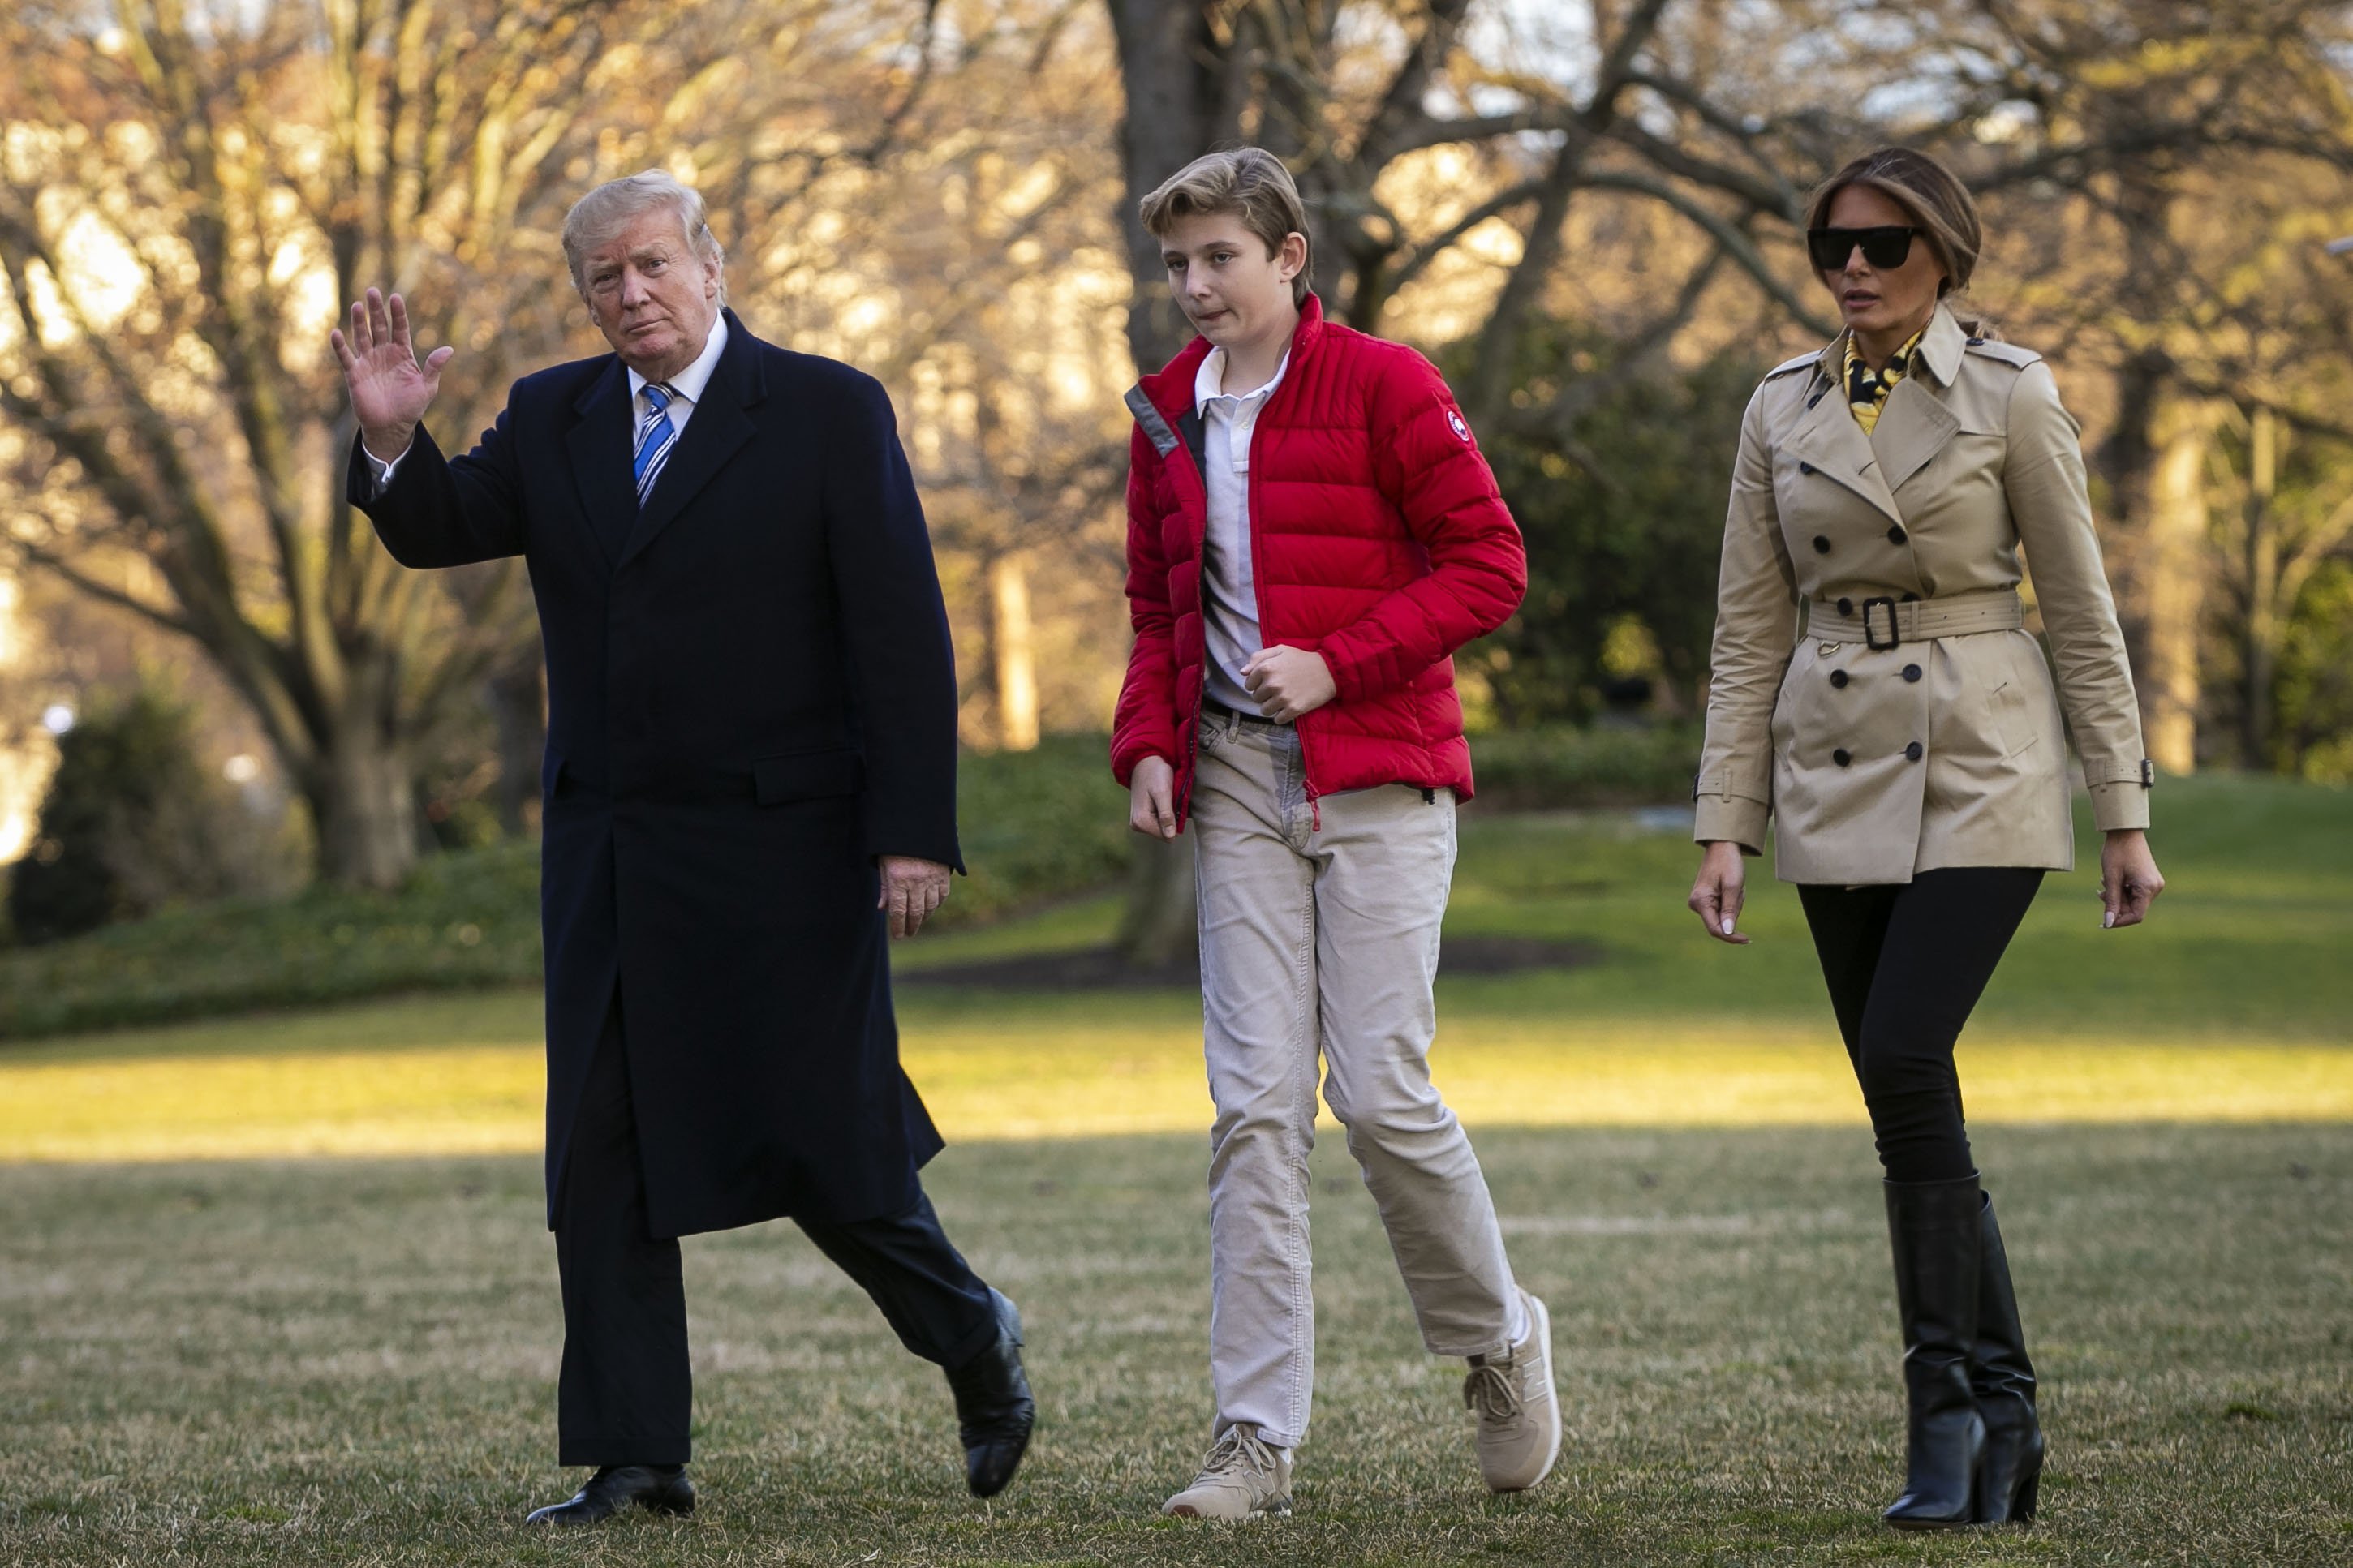 President Donald Trump, first lady Melania Trump, and their son Barron Trump, arrive on the White House from Mar-a-Lago, Florida on March 10, 2019. | Photo: GettyImages